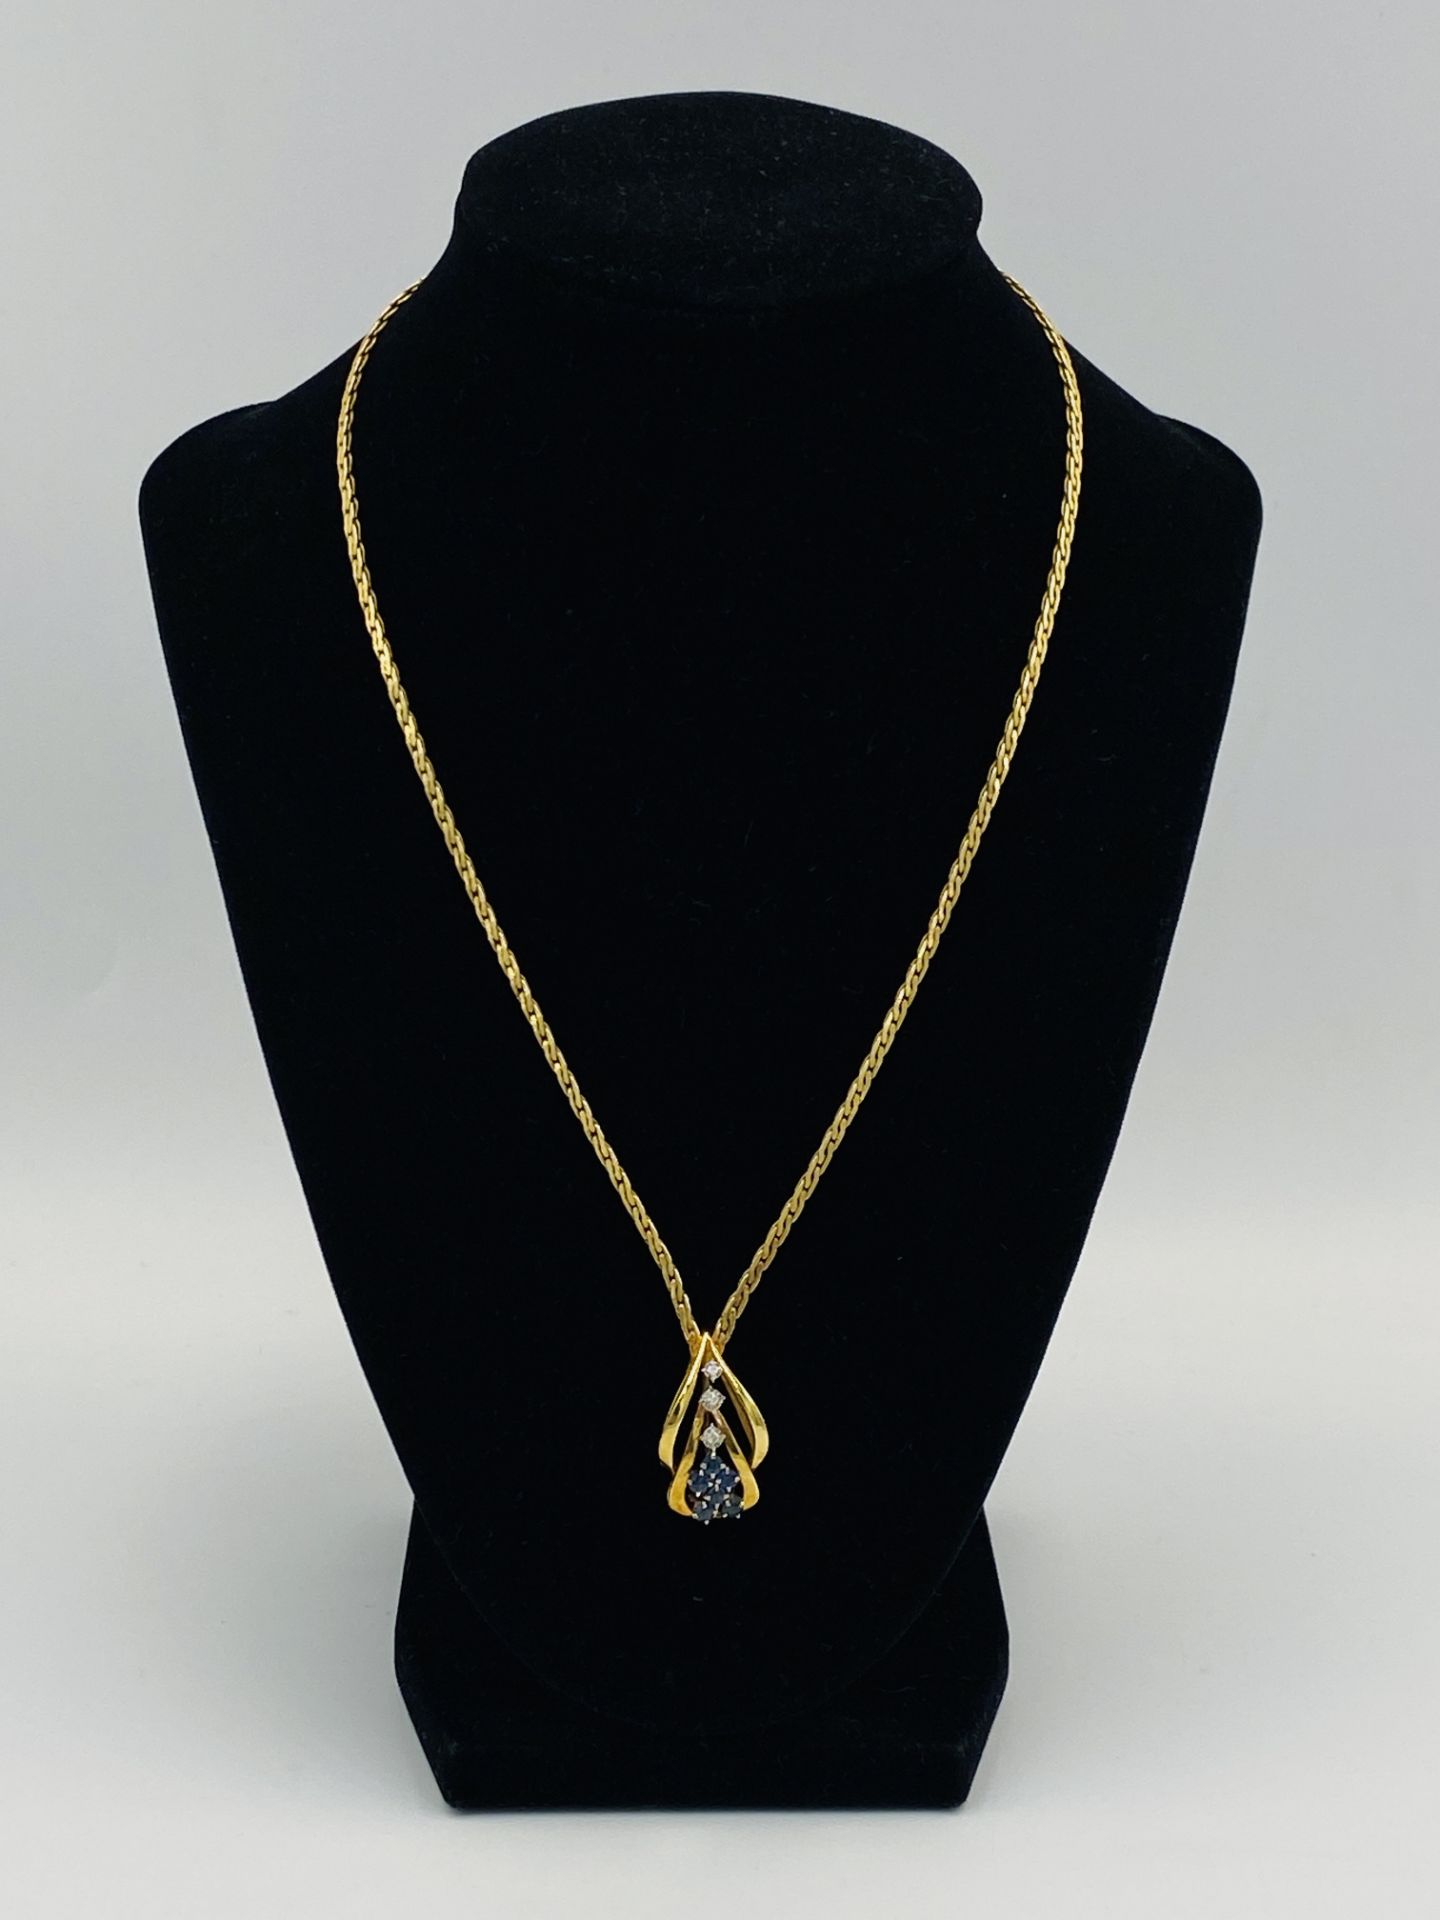 9ct gold, sapphire and diamond necklace - Image 2 of 6